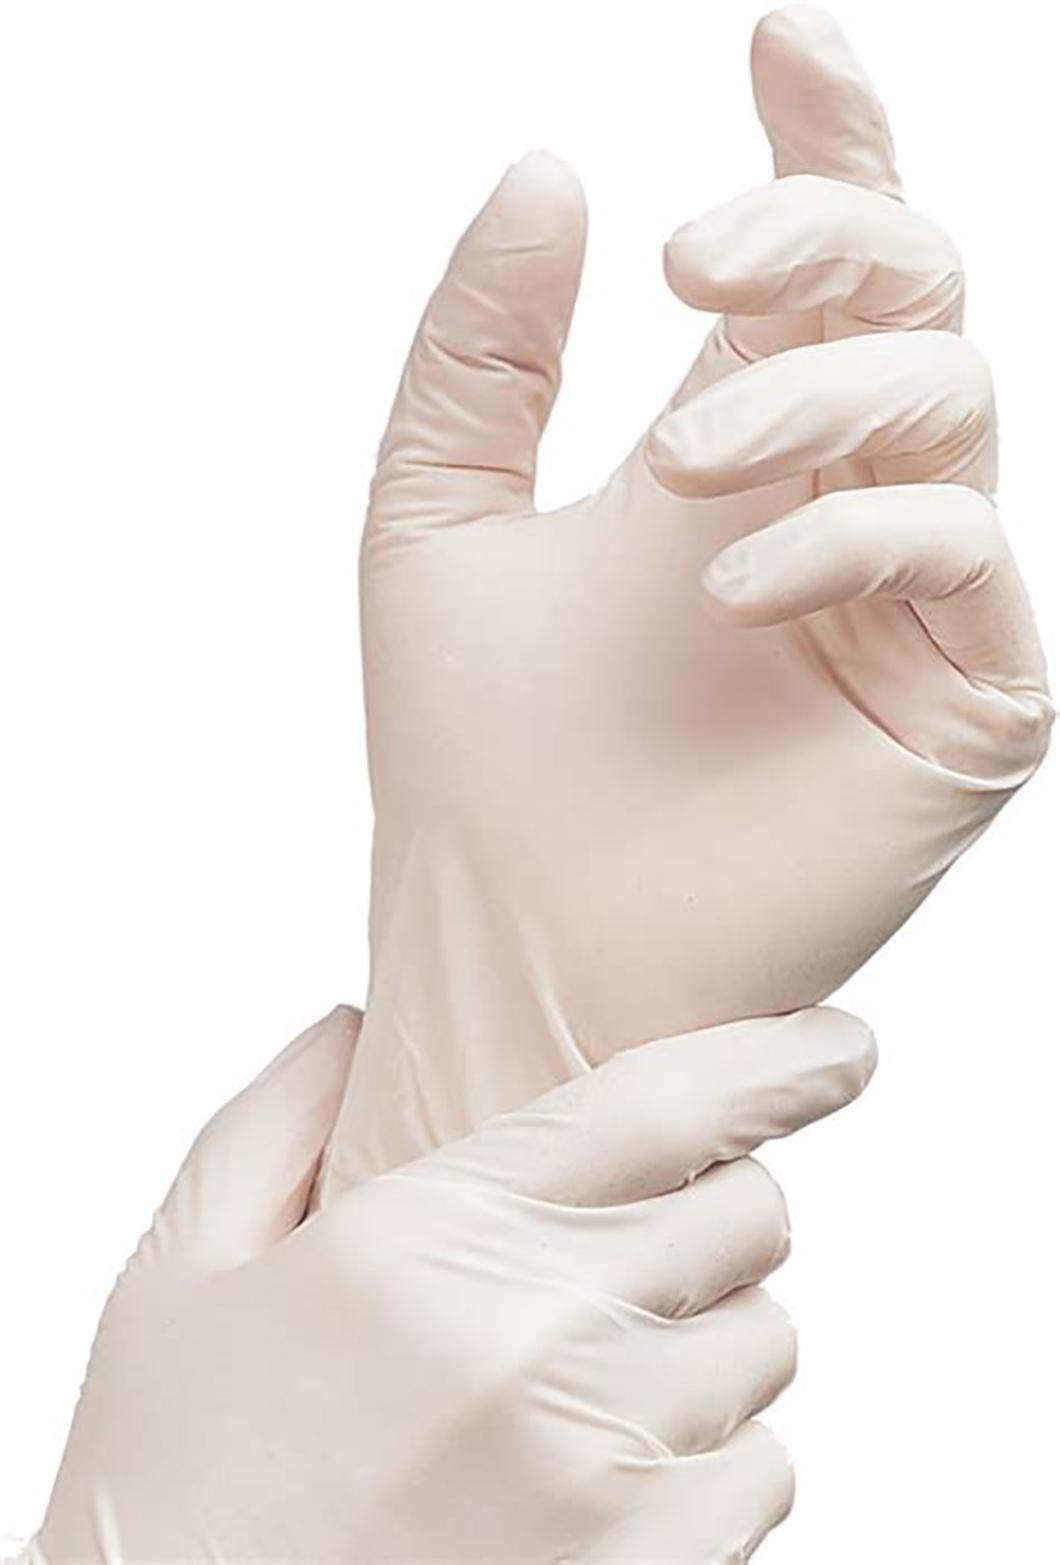 Disposable Latex Surgical Gloves Powder Free